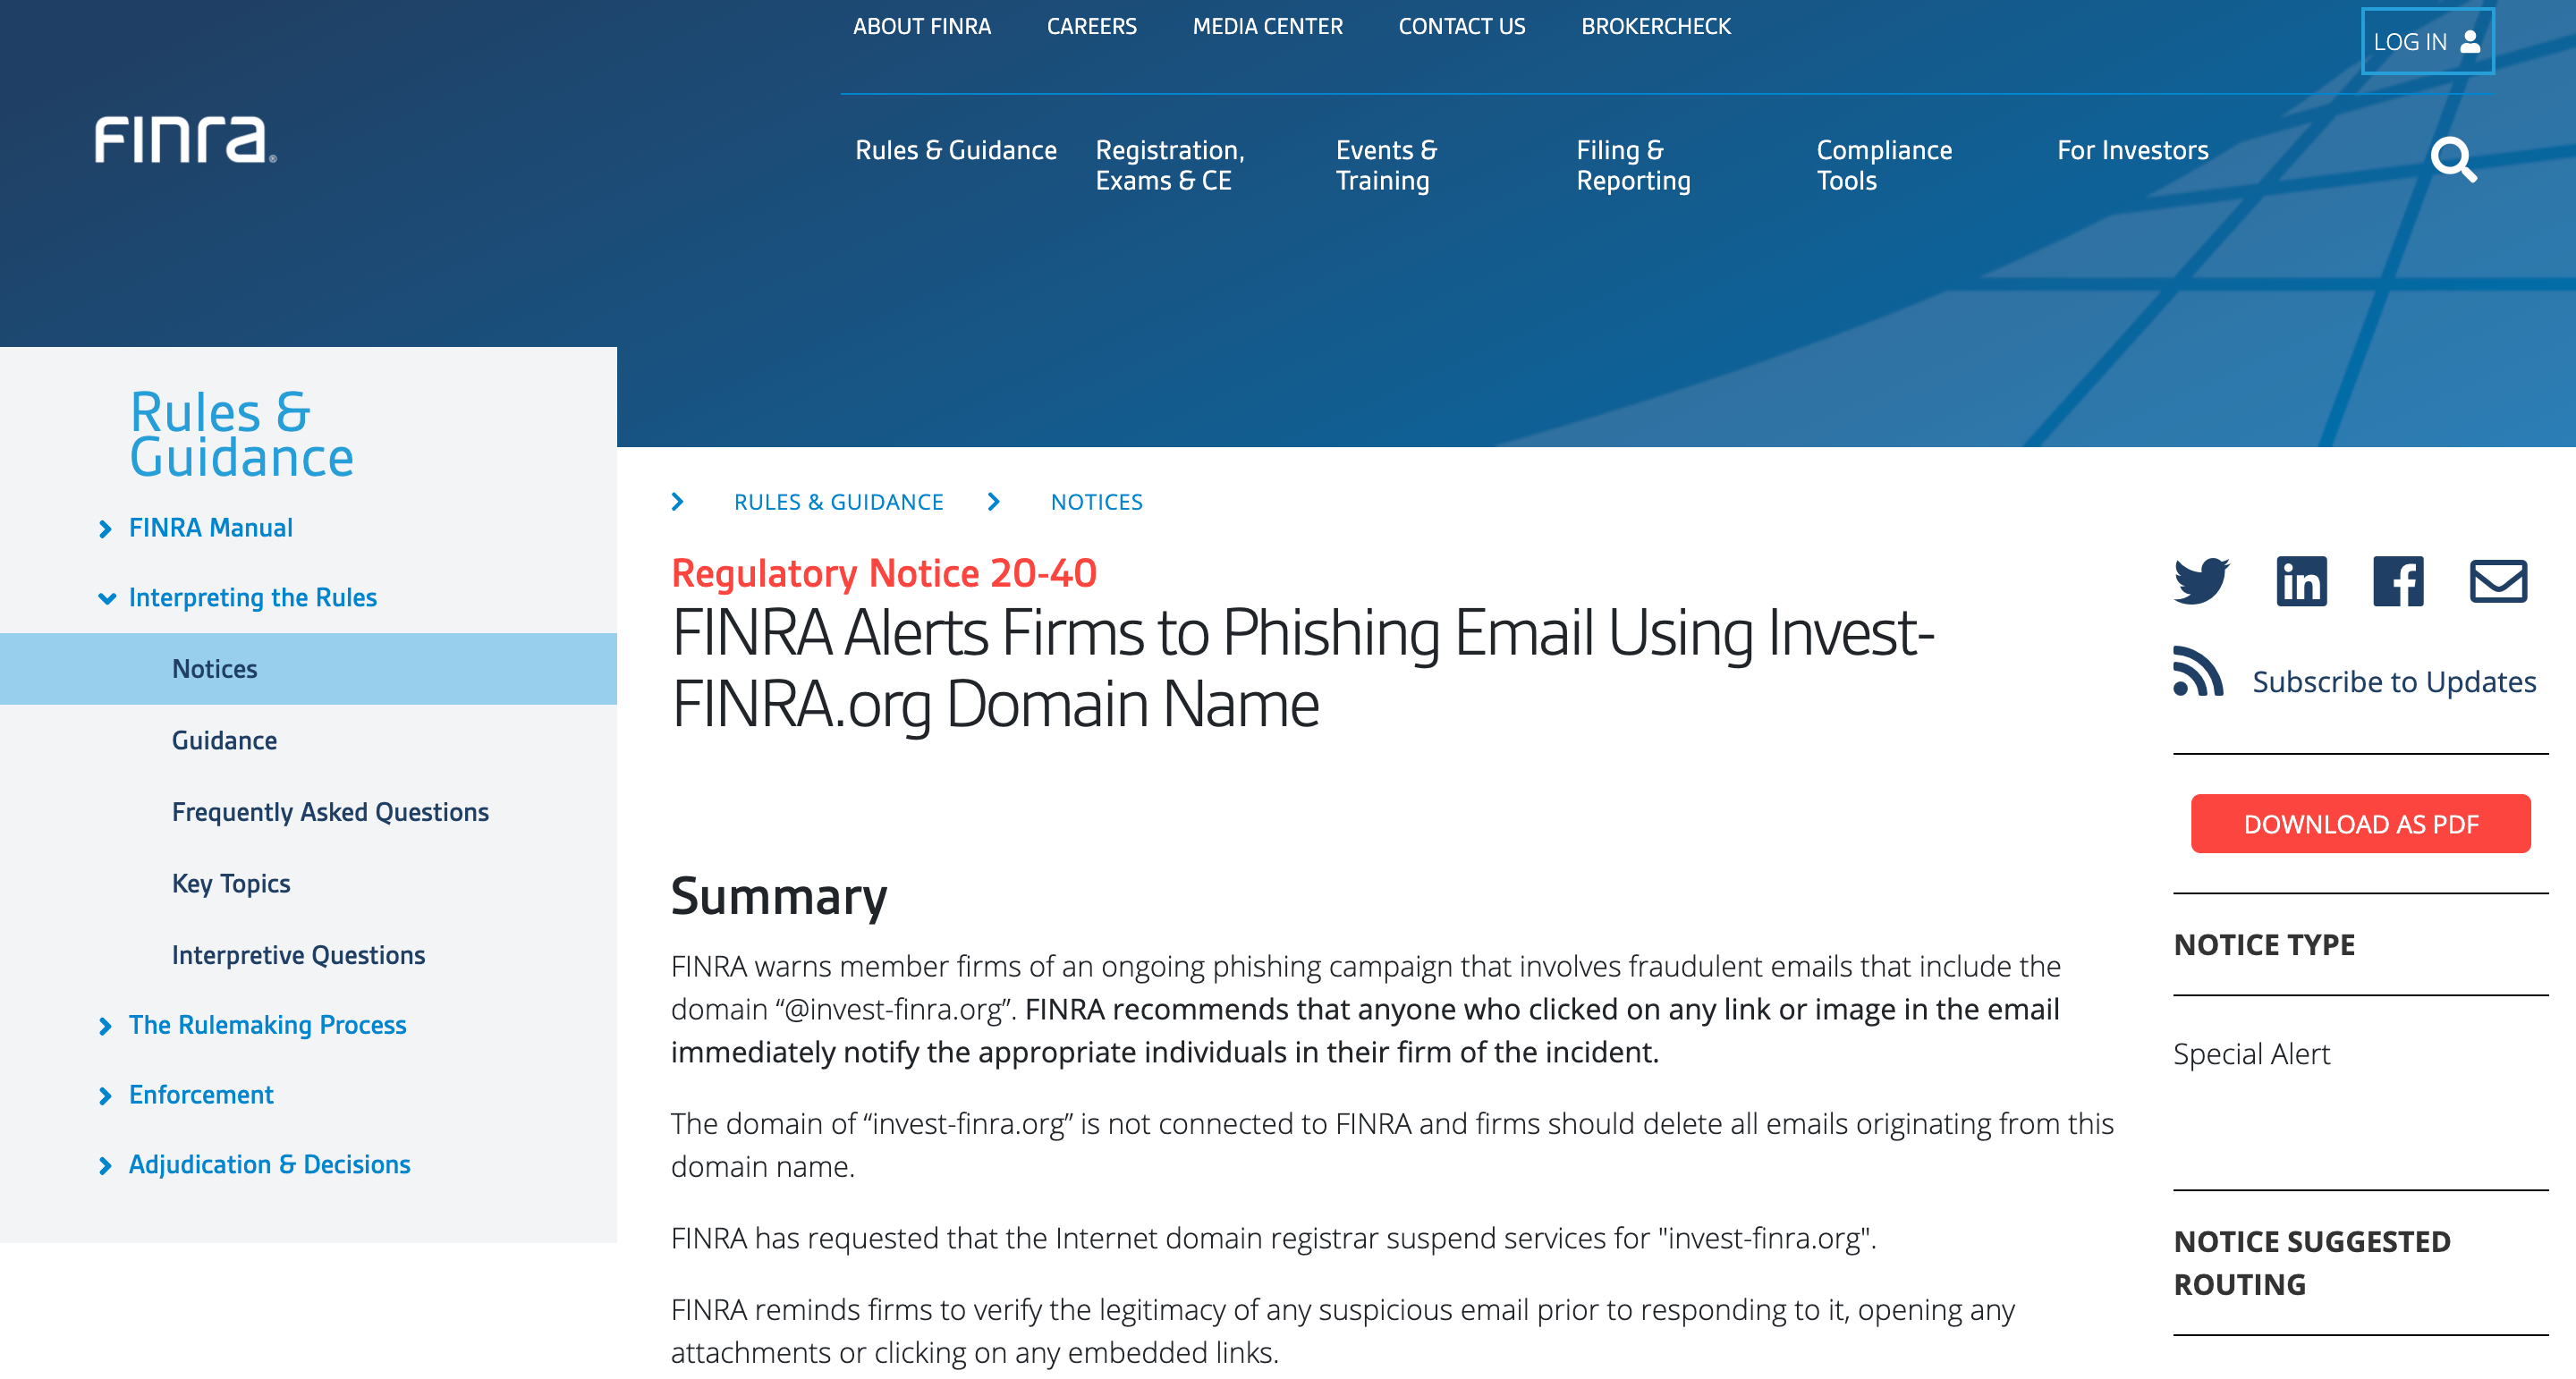 FINRA-canh-bao-ve-lua-dao-hang-loat-qua-email-gia-mao-TraderViet1.png